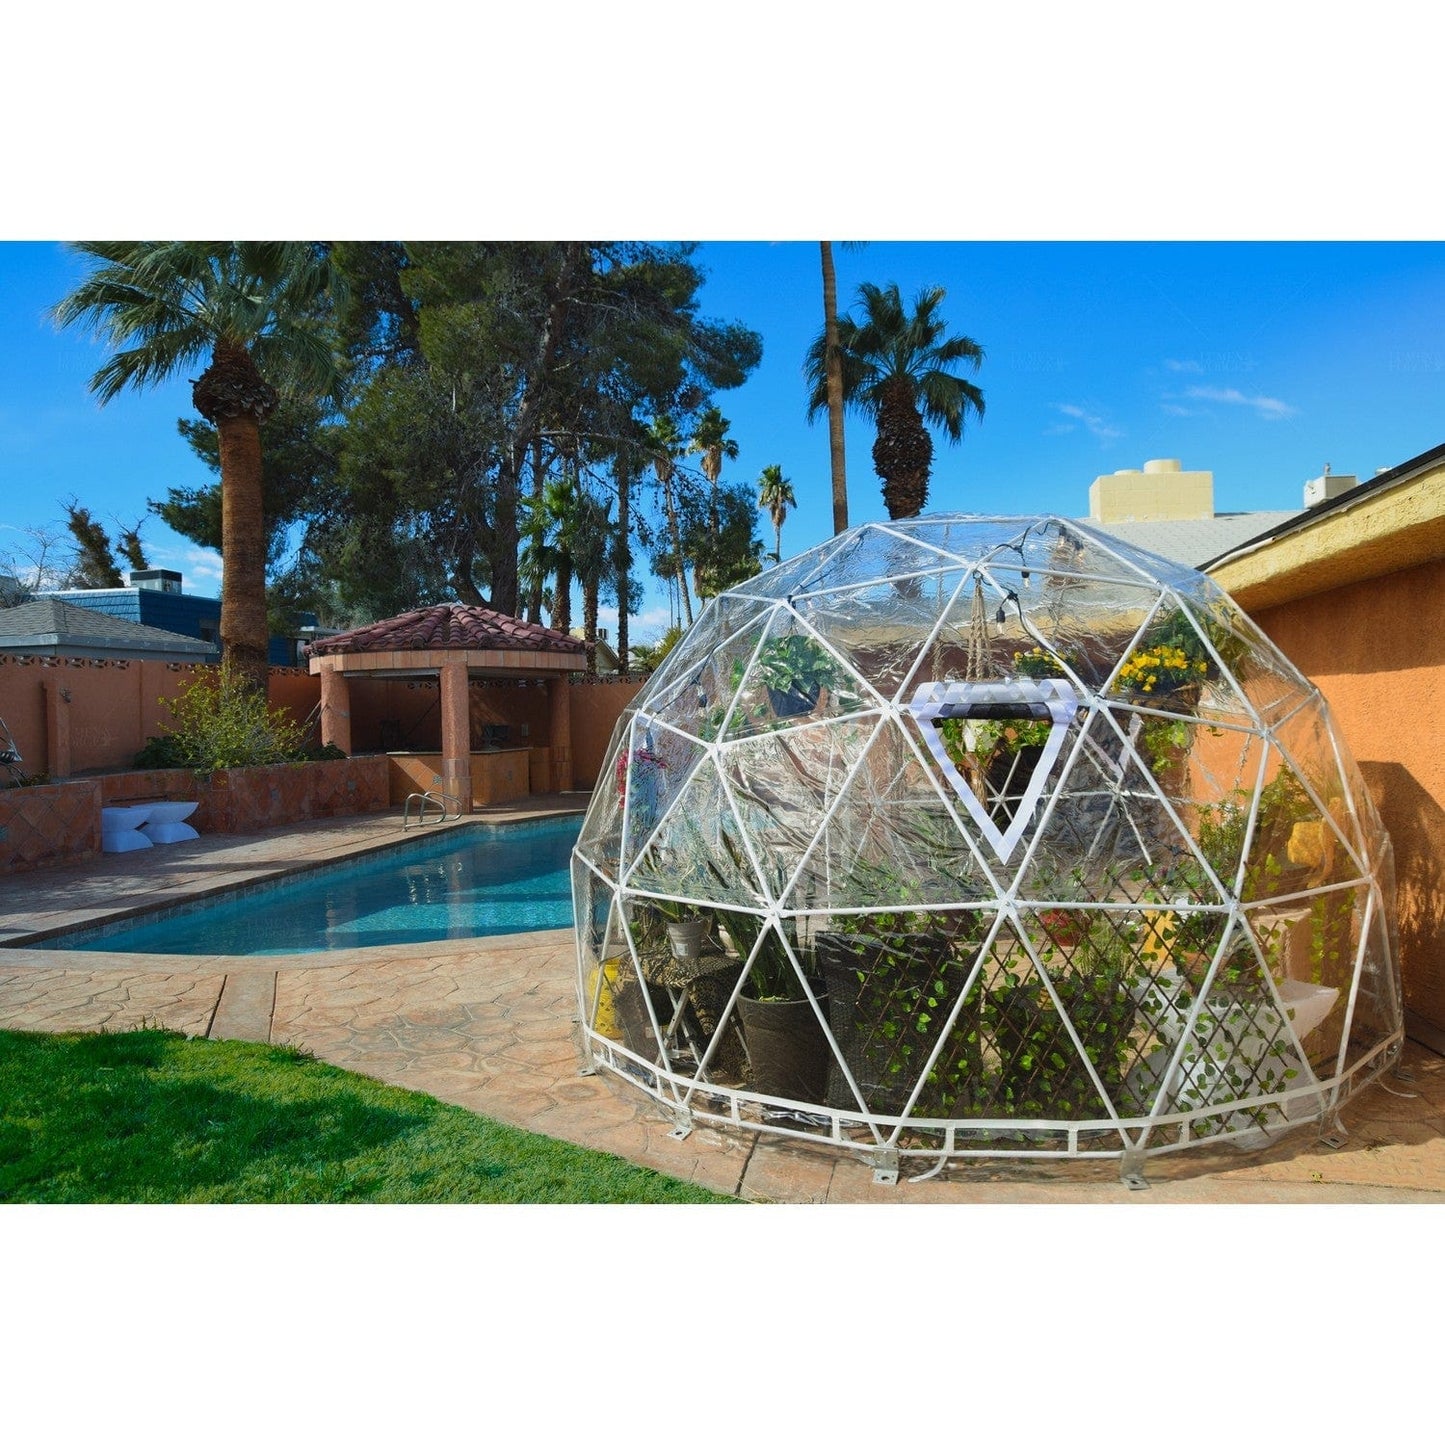 Lumen & Forge Sun Room Kit Lumen & Forge | Geodesic Dome Greenhouse, Sunroom, Dining - 16 ft 5m-Dome